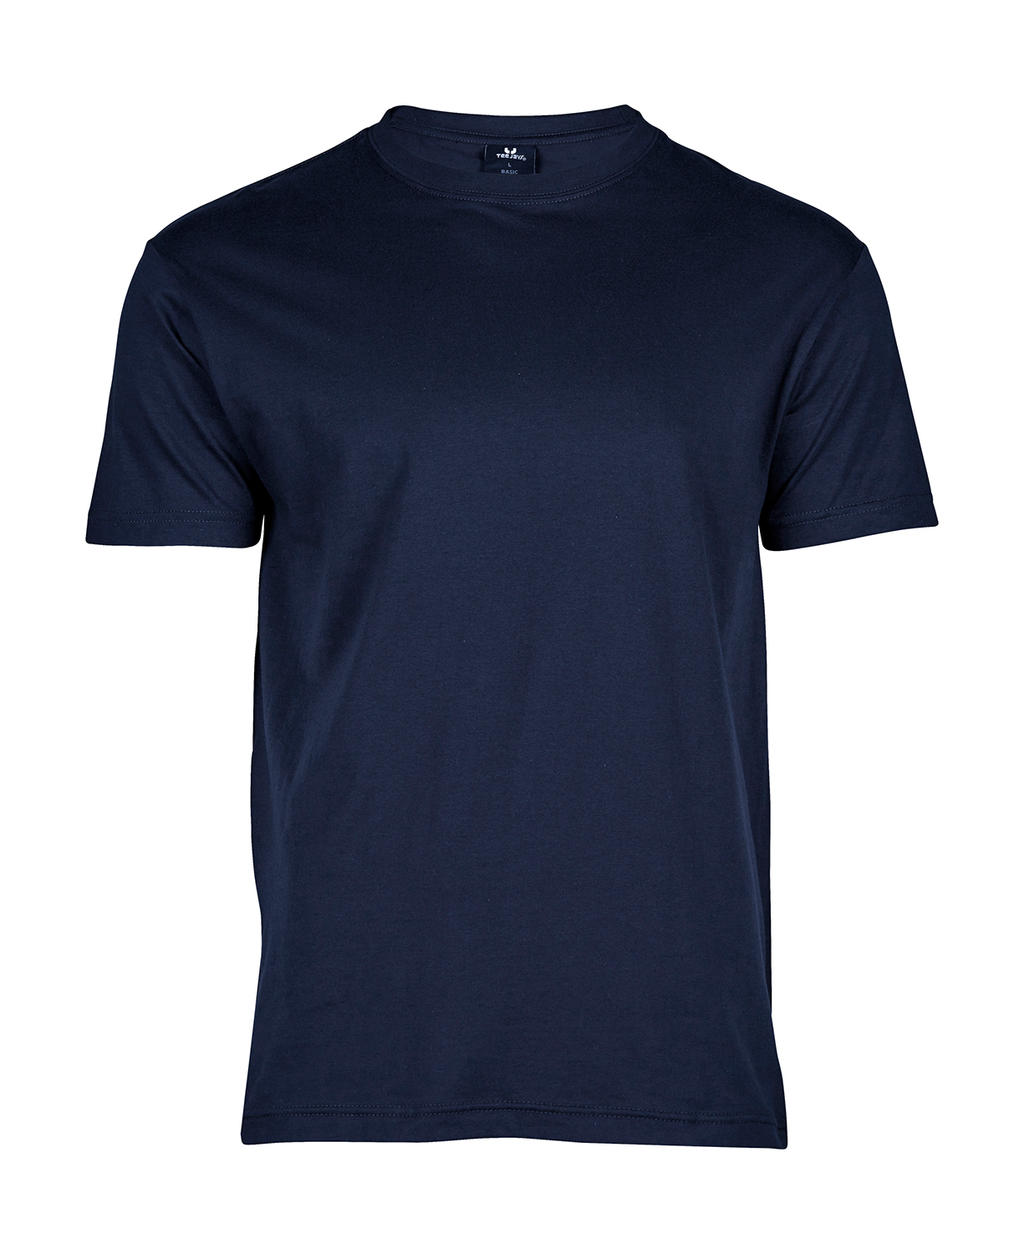  Basic Tee in Farbe Navy